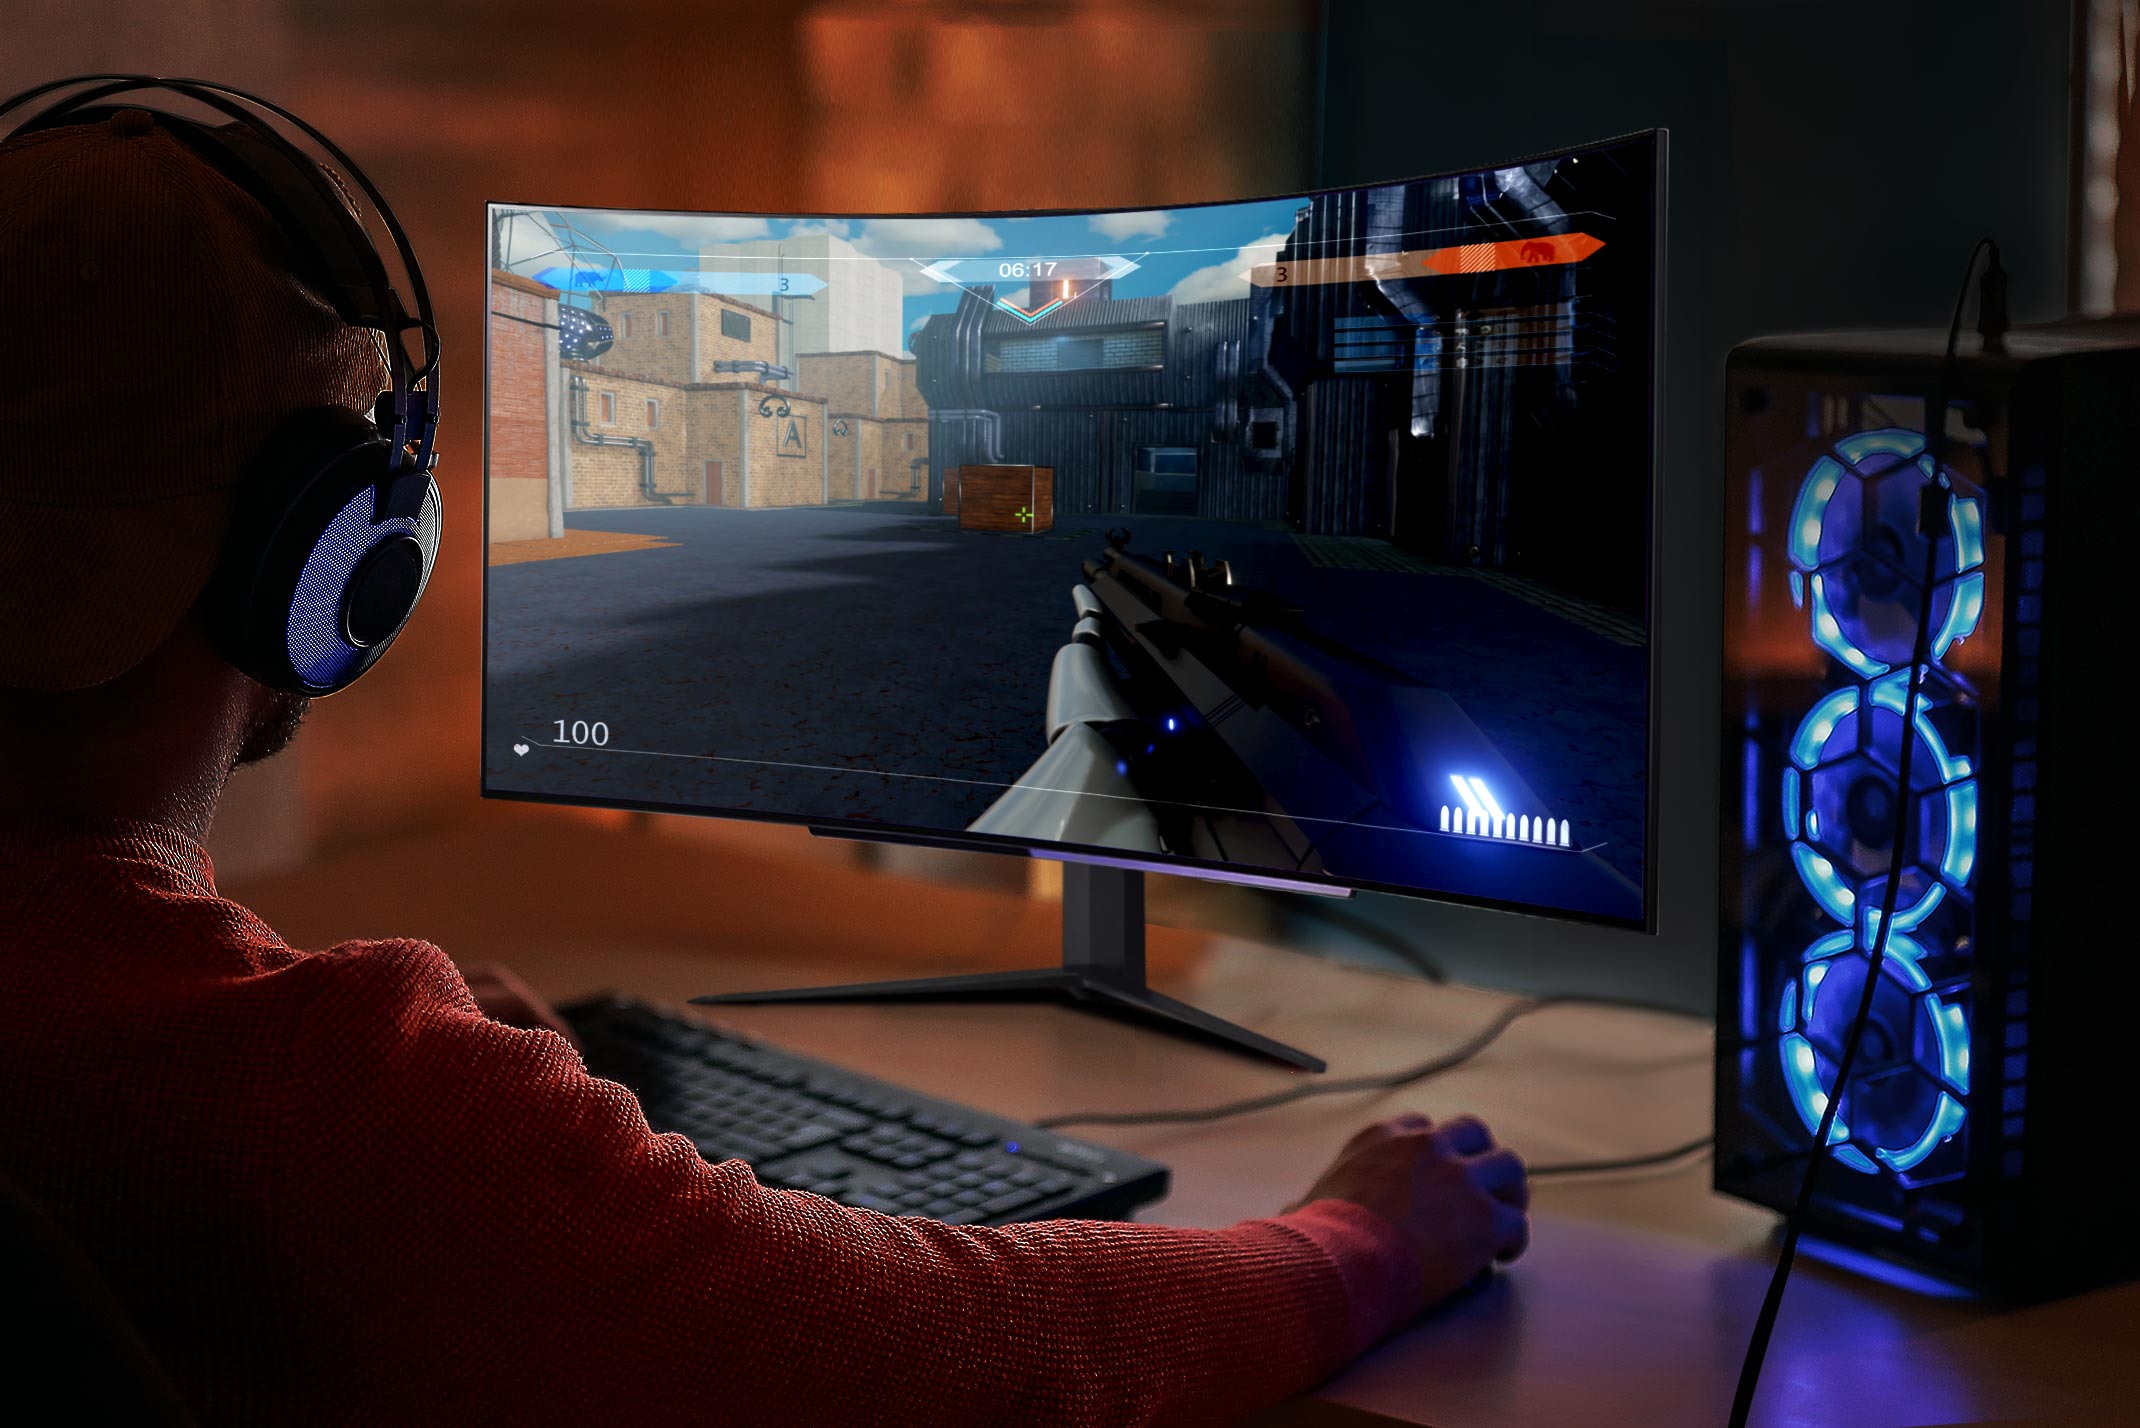 With a huge 45” display, 21:9 aspect ratio and a dramatic curved OLED screen, you’ll feel like you’re actually in the game. LG gaming monitor.